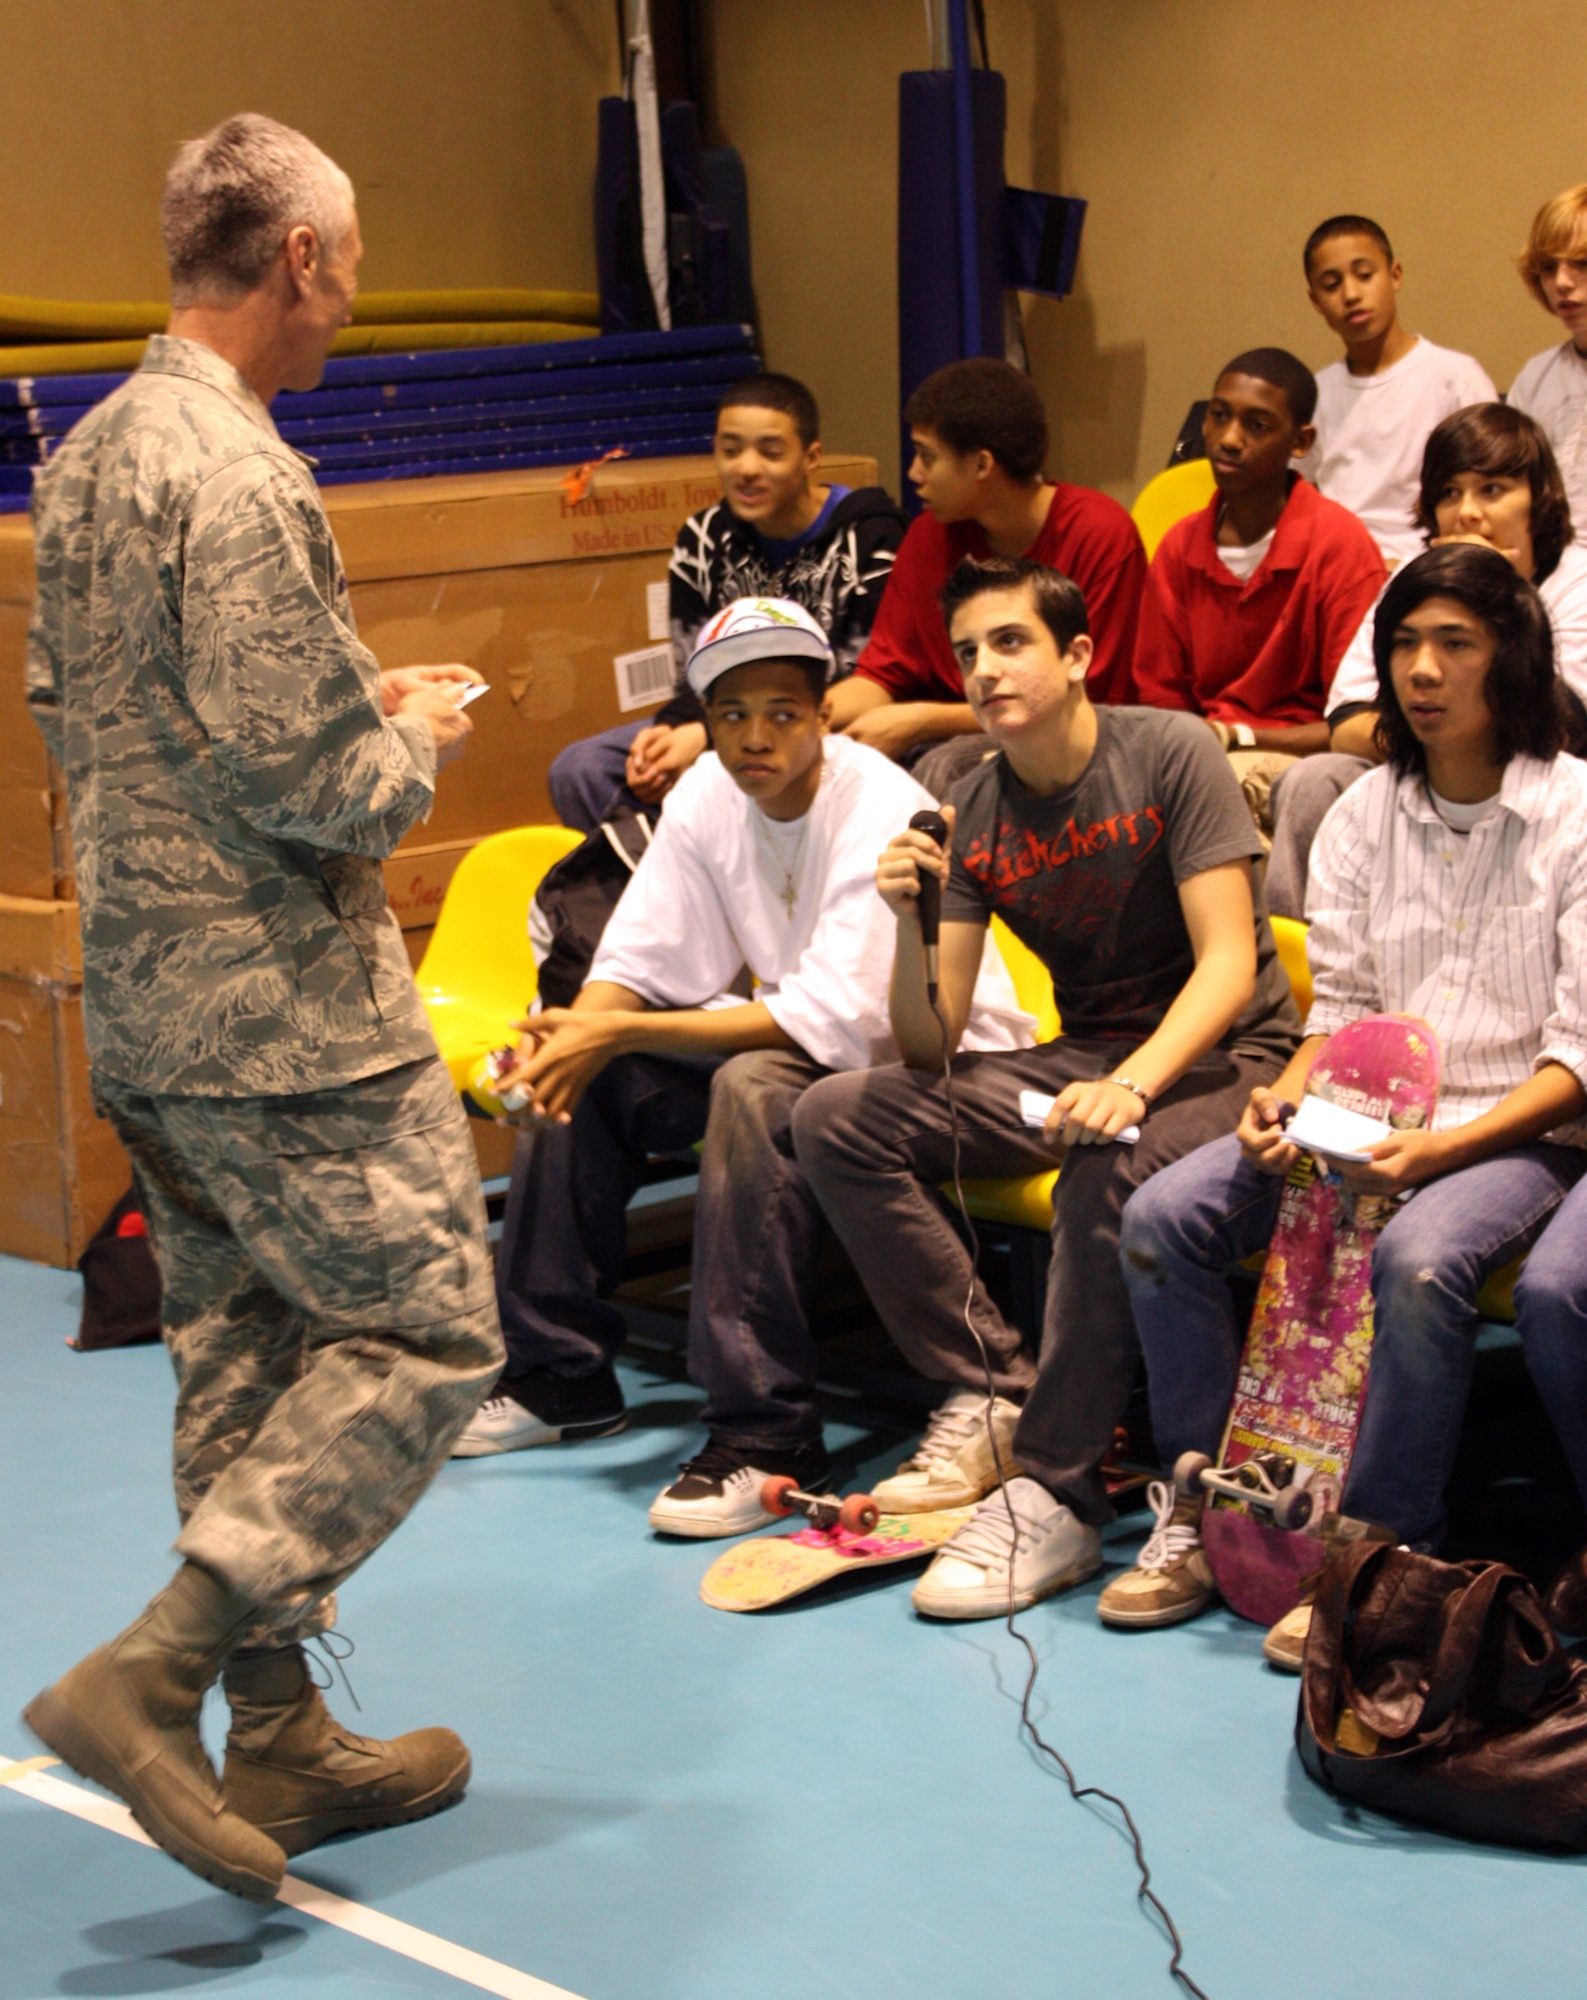 Col. Phil McDaniel, 39th Air Base Wing commander, listens to Mr. Rick Schott's questions about  the youth center skate park during a teen town hall meeting at Incirlik's youth center Jan.28. (U.S. Air Force photo by Staff. Sgt. Christopher Galindo)